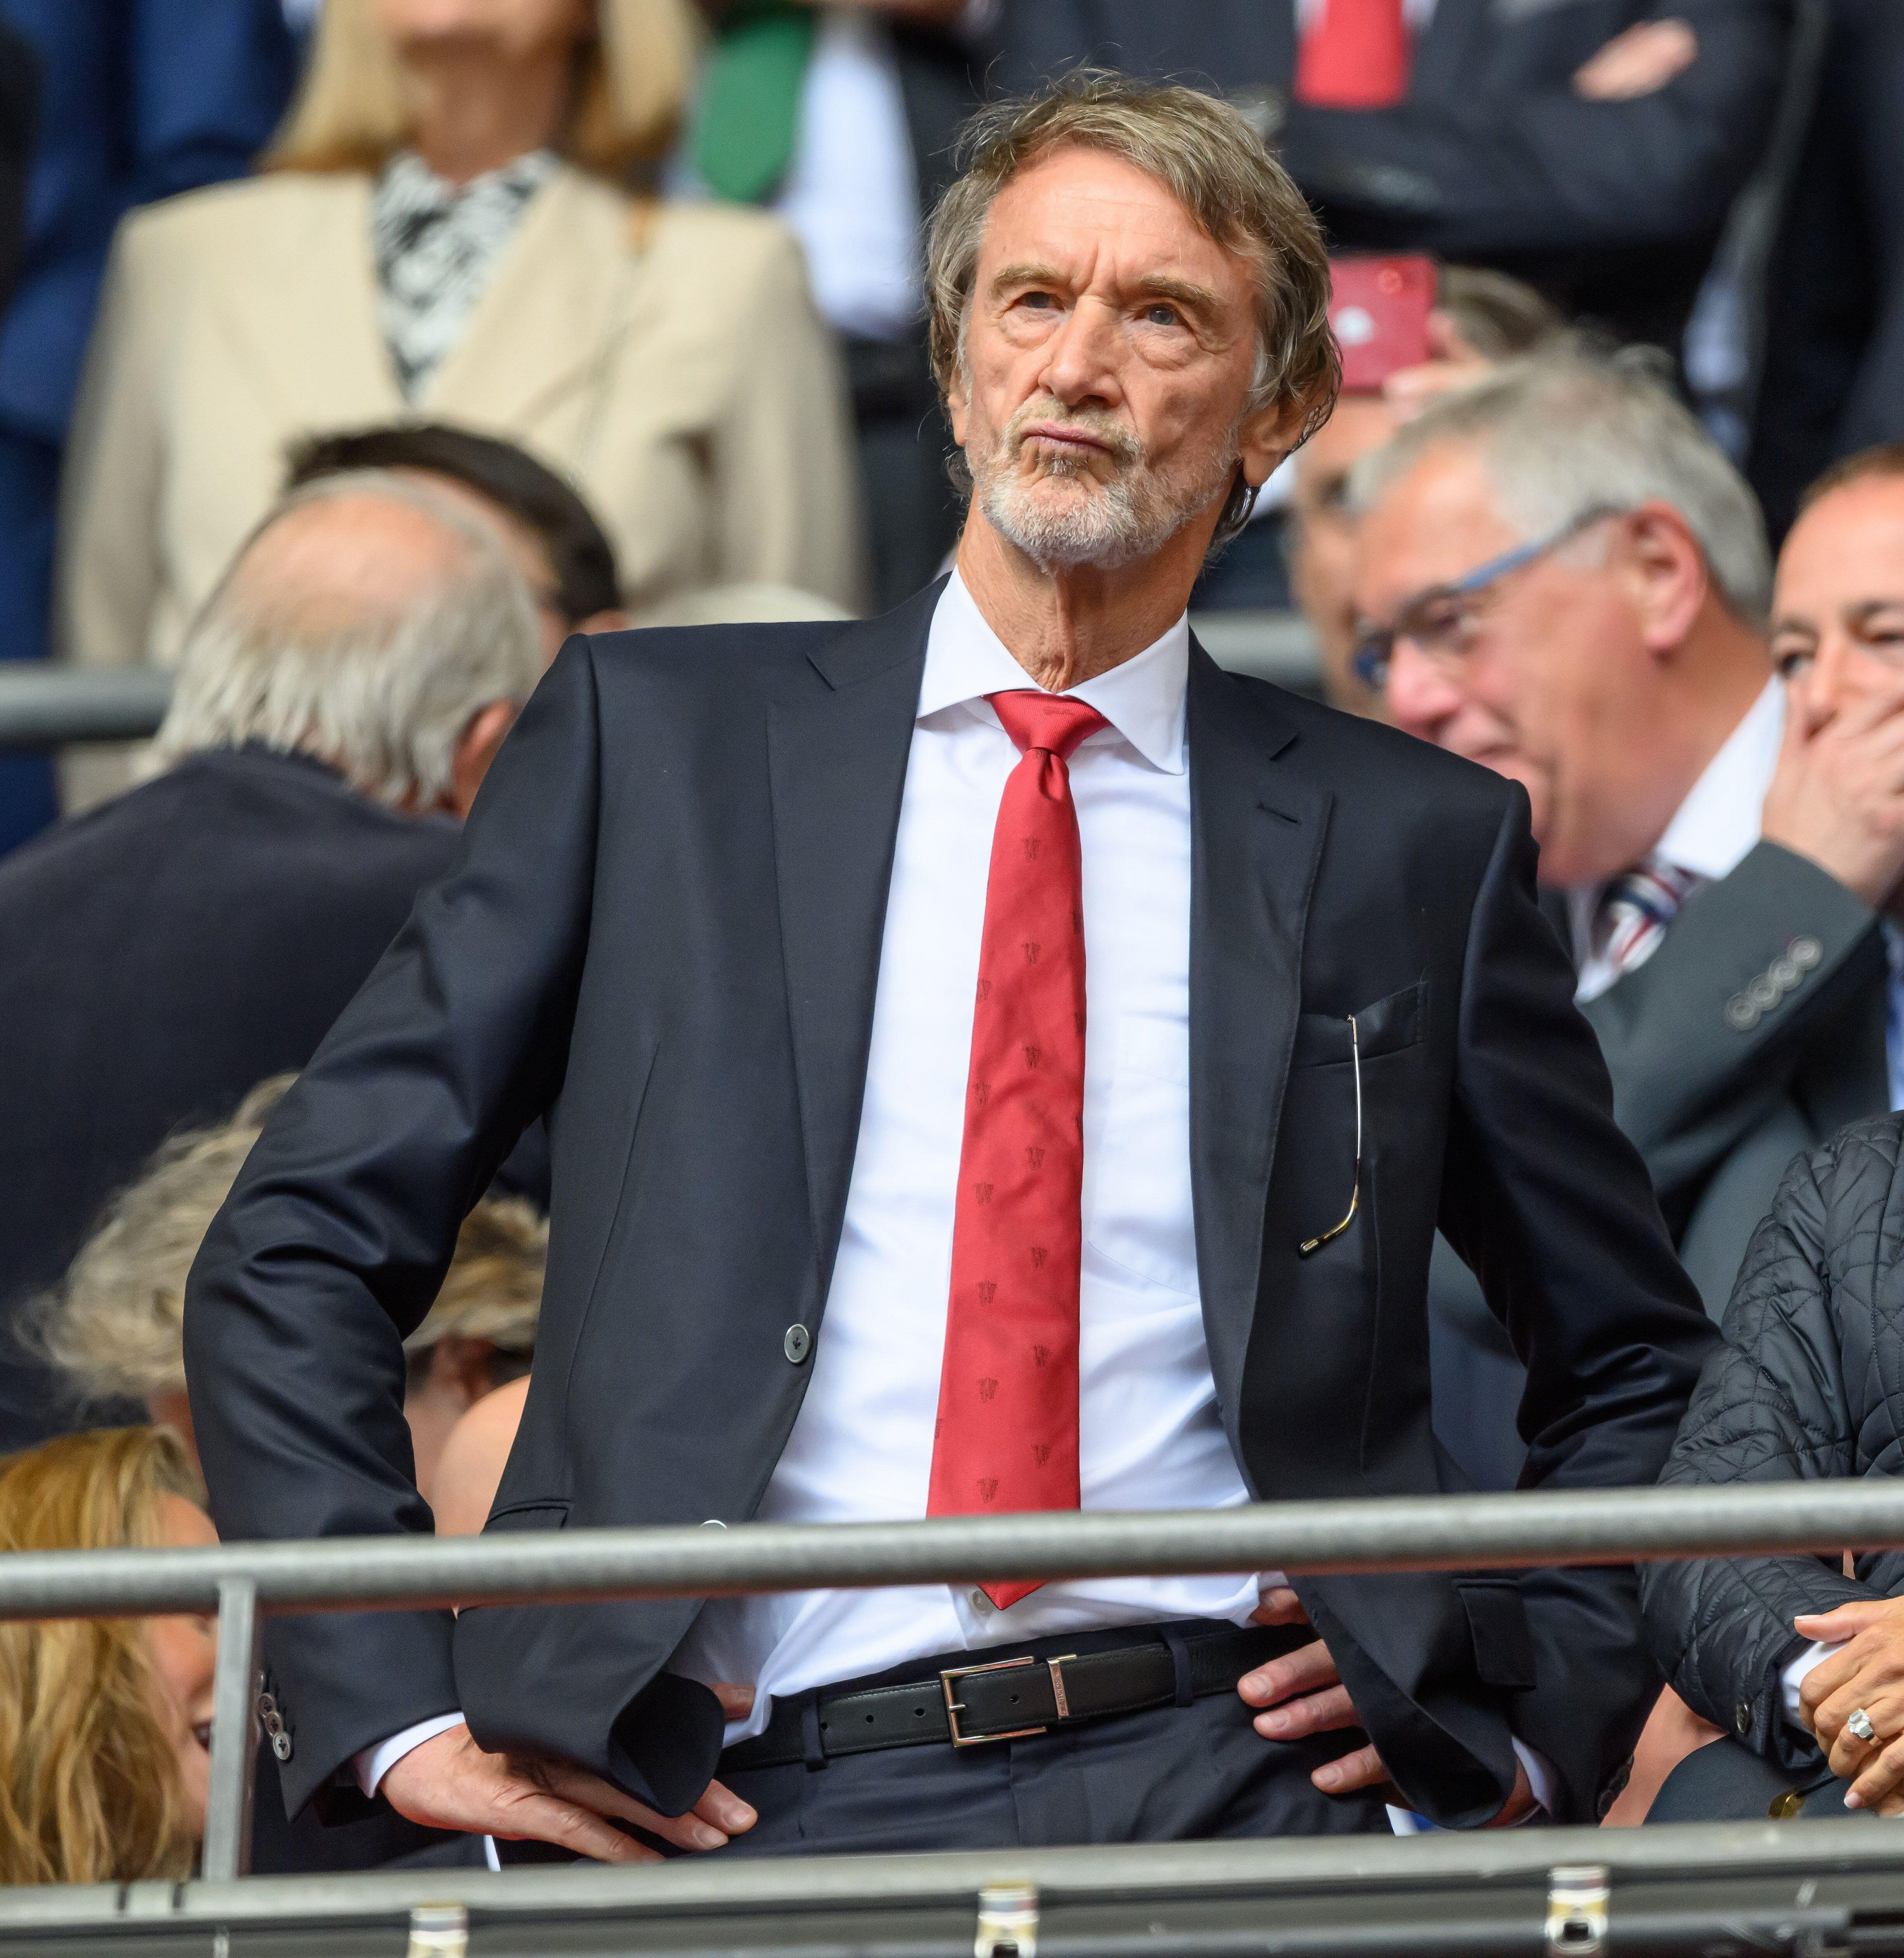 Sir Jim Ratcliffe has chosen to stick with Ten Hag after his end-of-season review